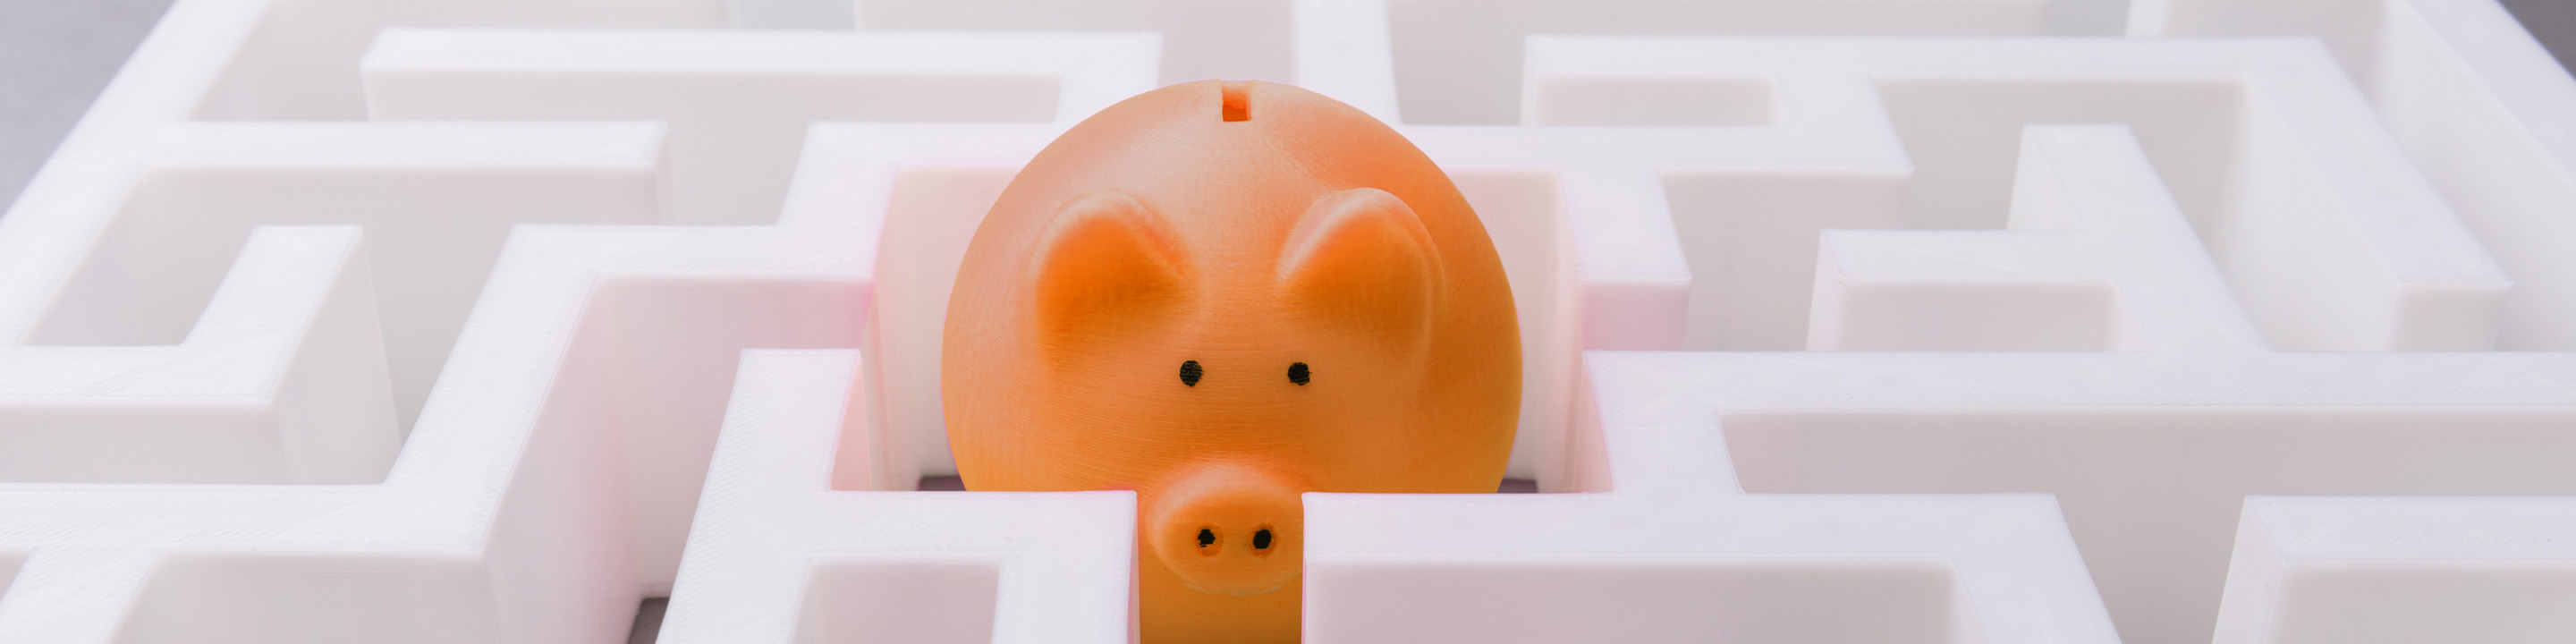 Saving Working Capital: 4 Ways to Improve Your Efficiency and Cash Flow